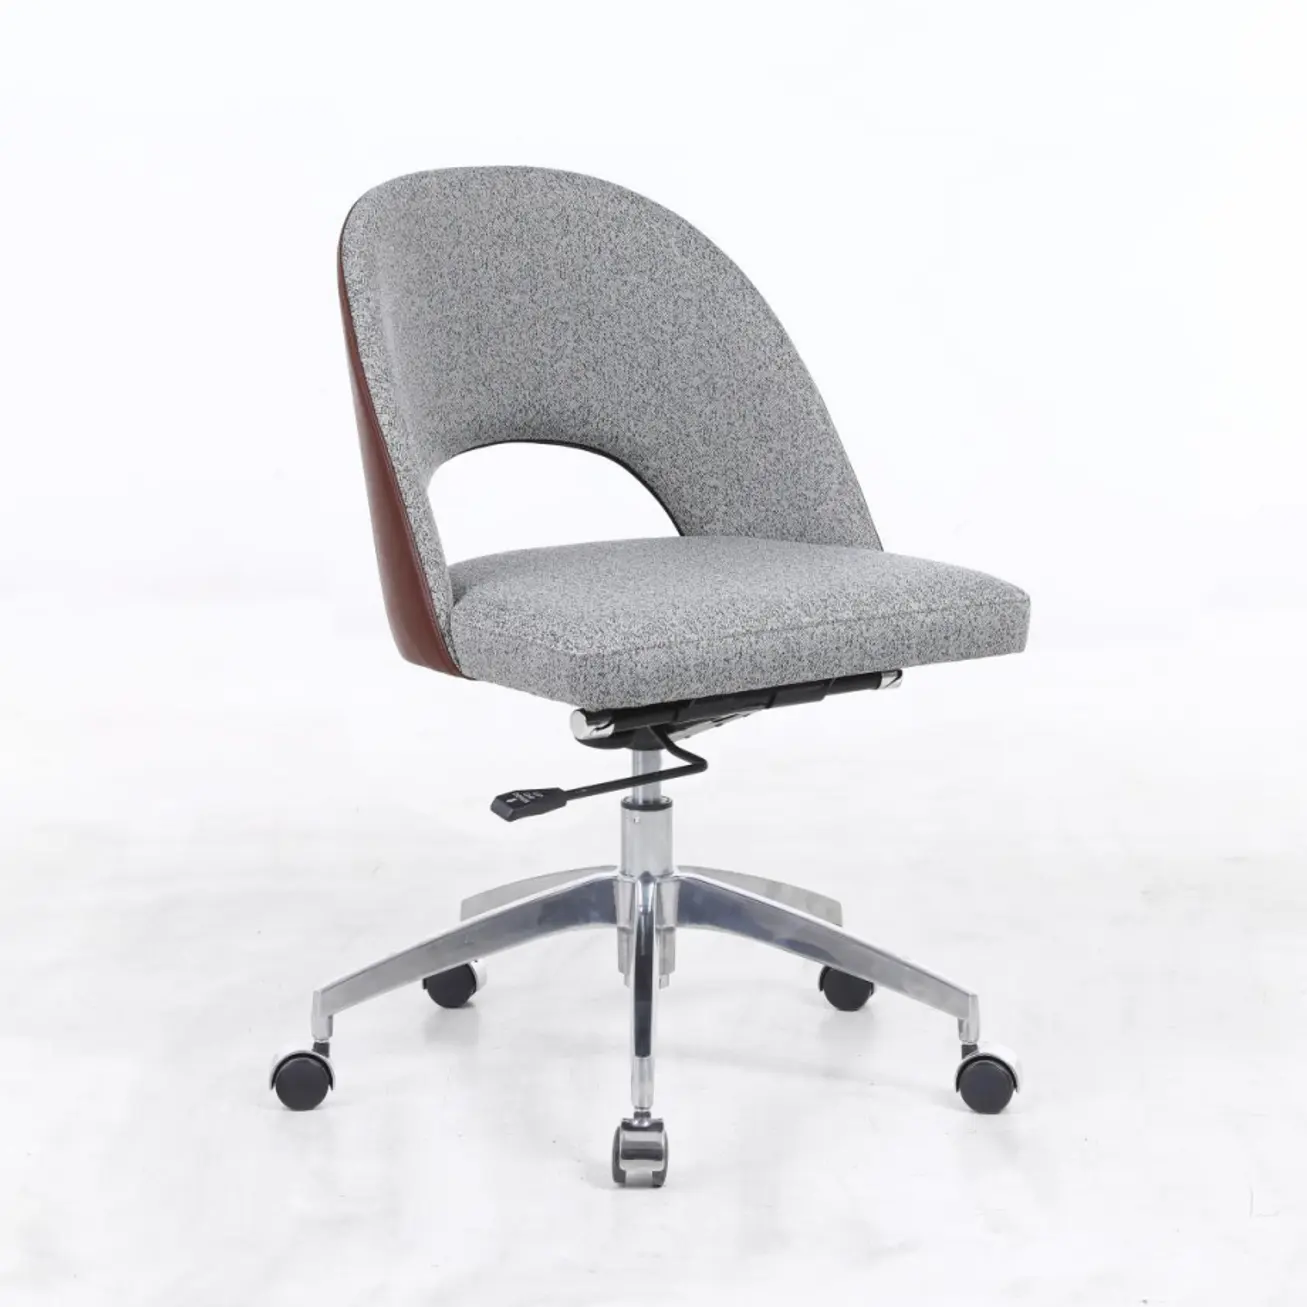 Reliable Quality High Back Executive Leisure Office Boss Chair Computer Executive Leather Chair Design